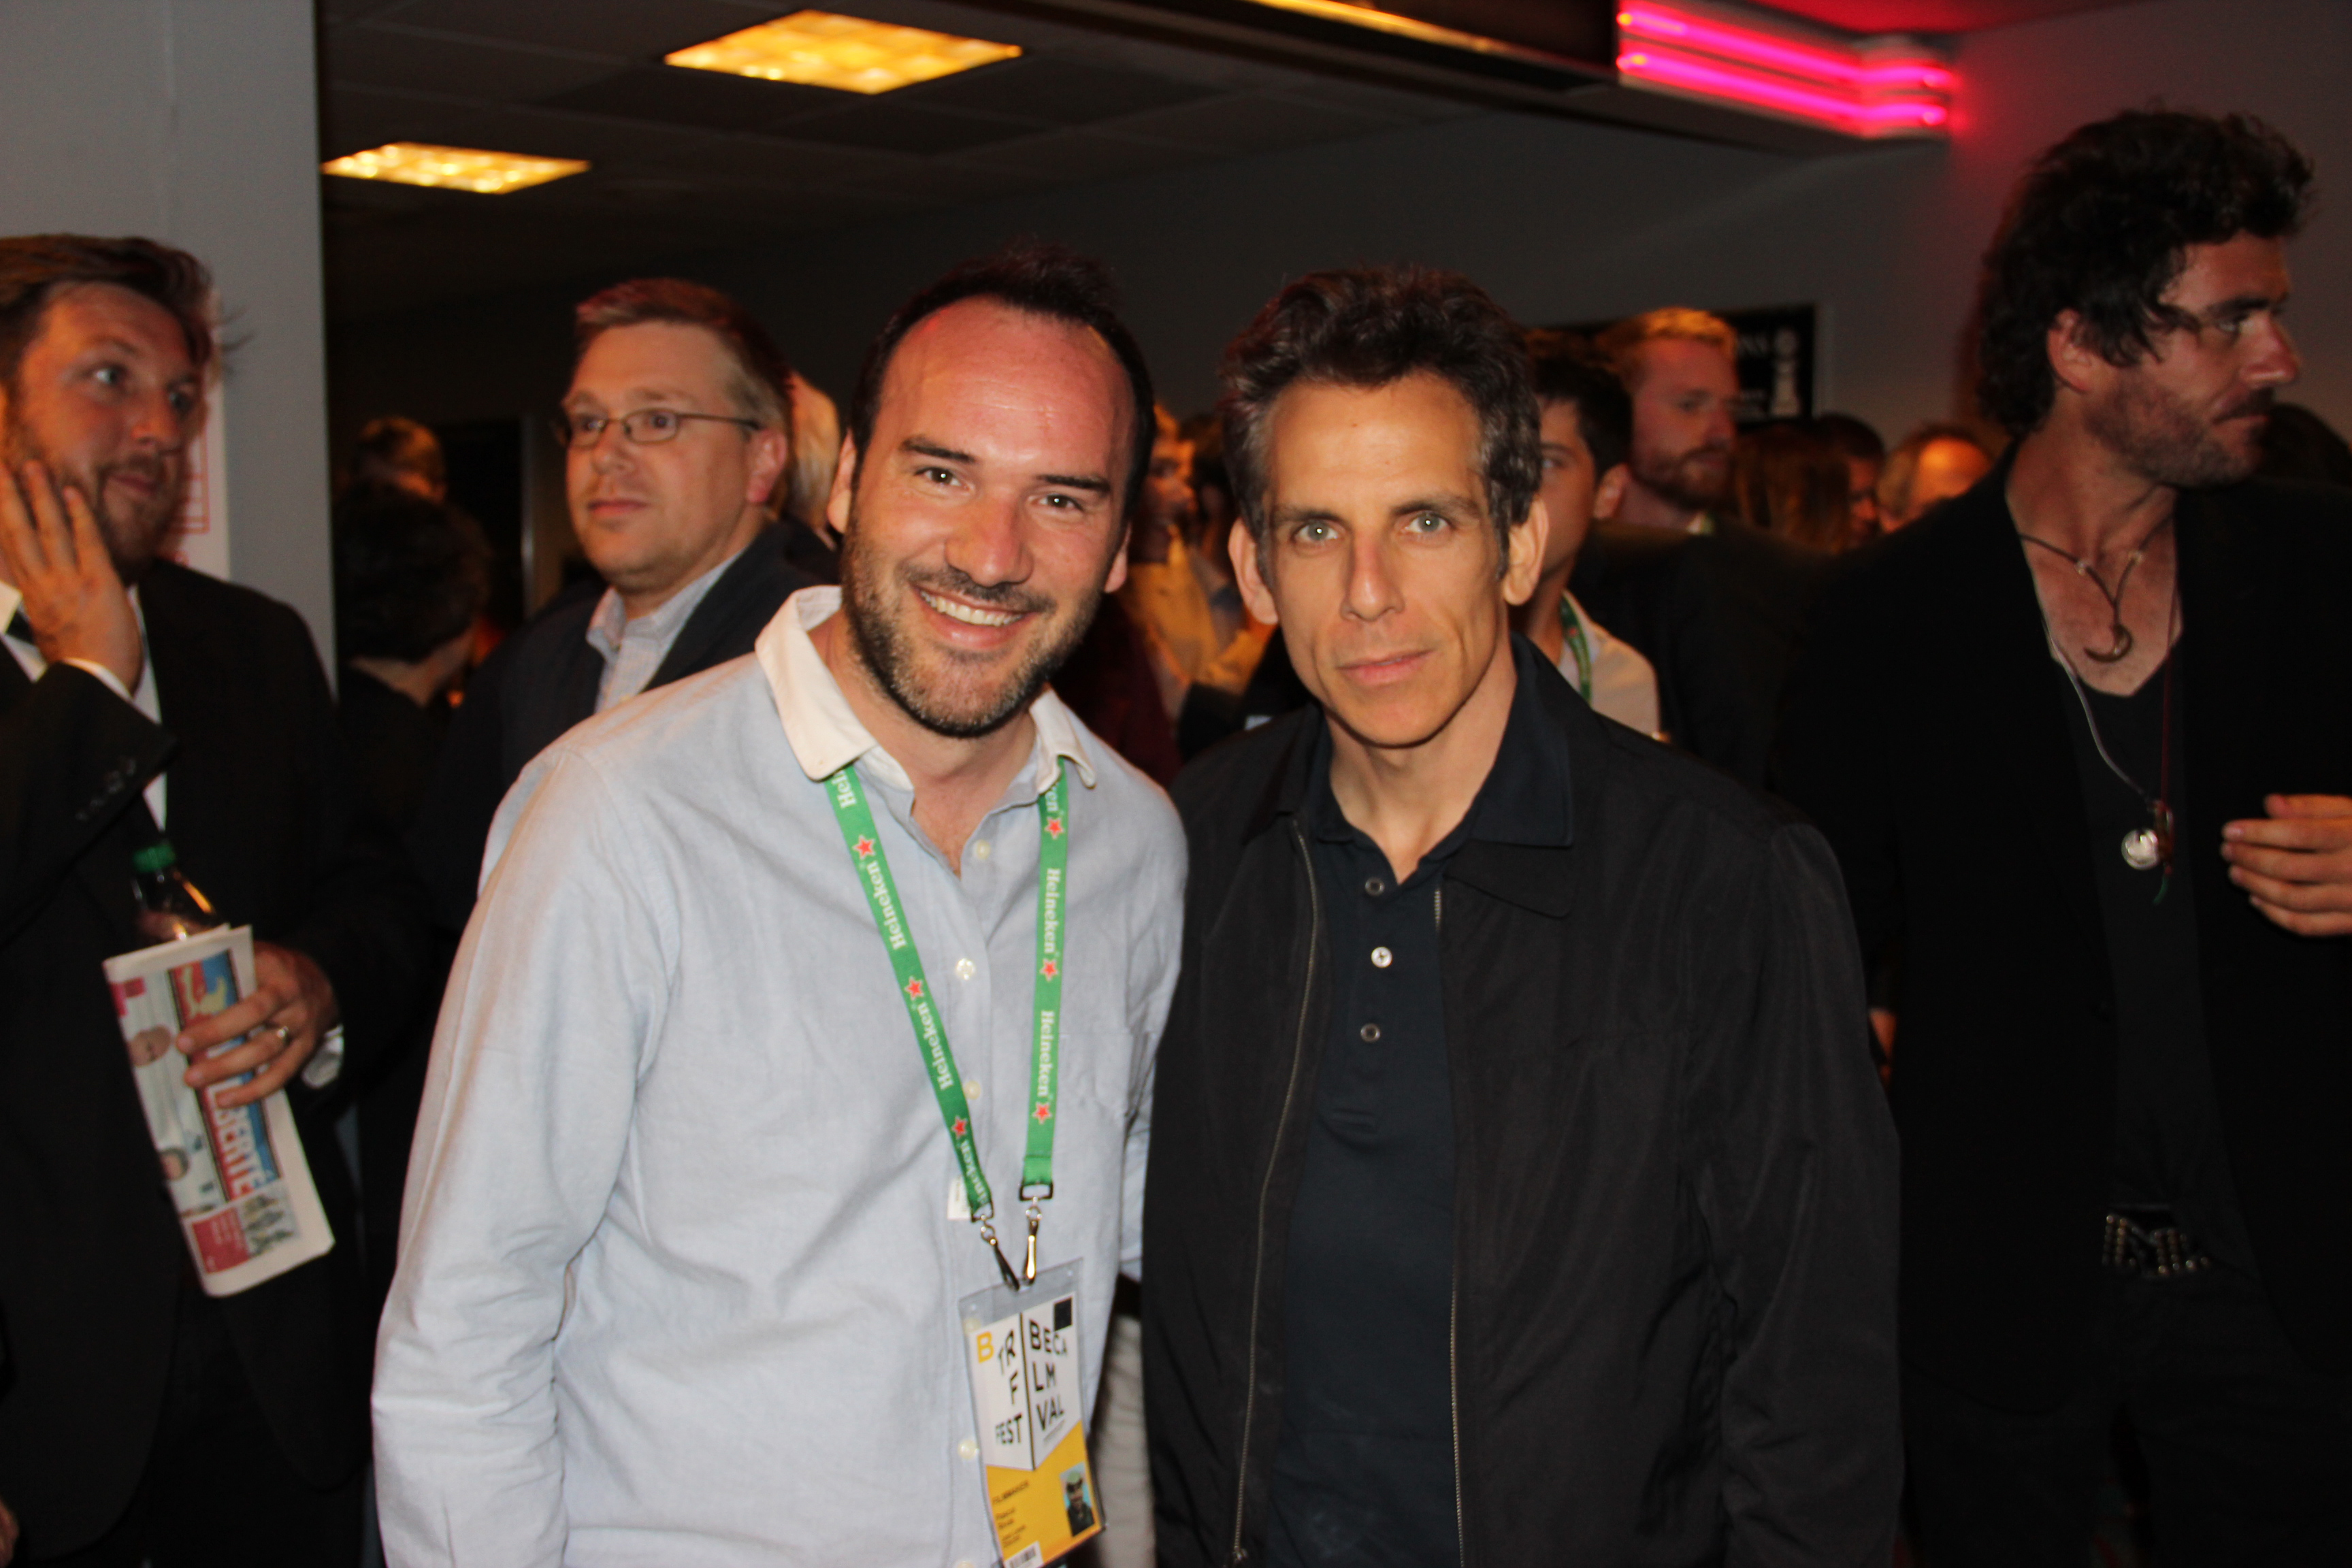 Director Pascui Rivas and Actor Ben Stiller at the screening of 